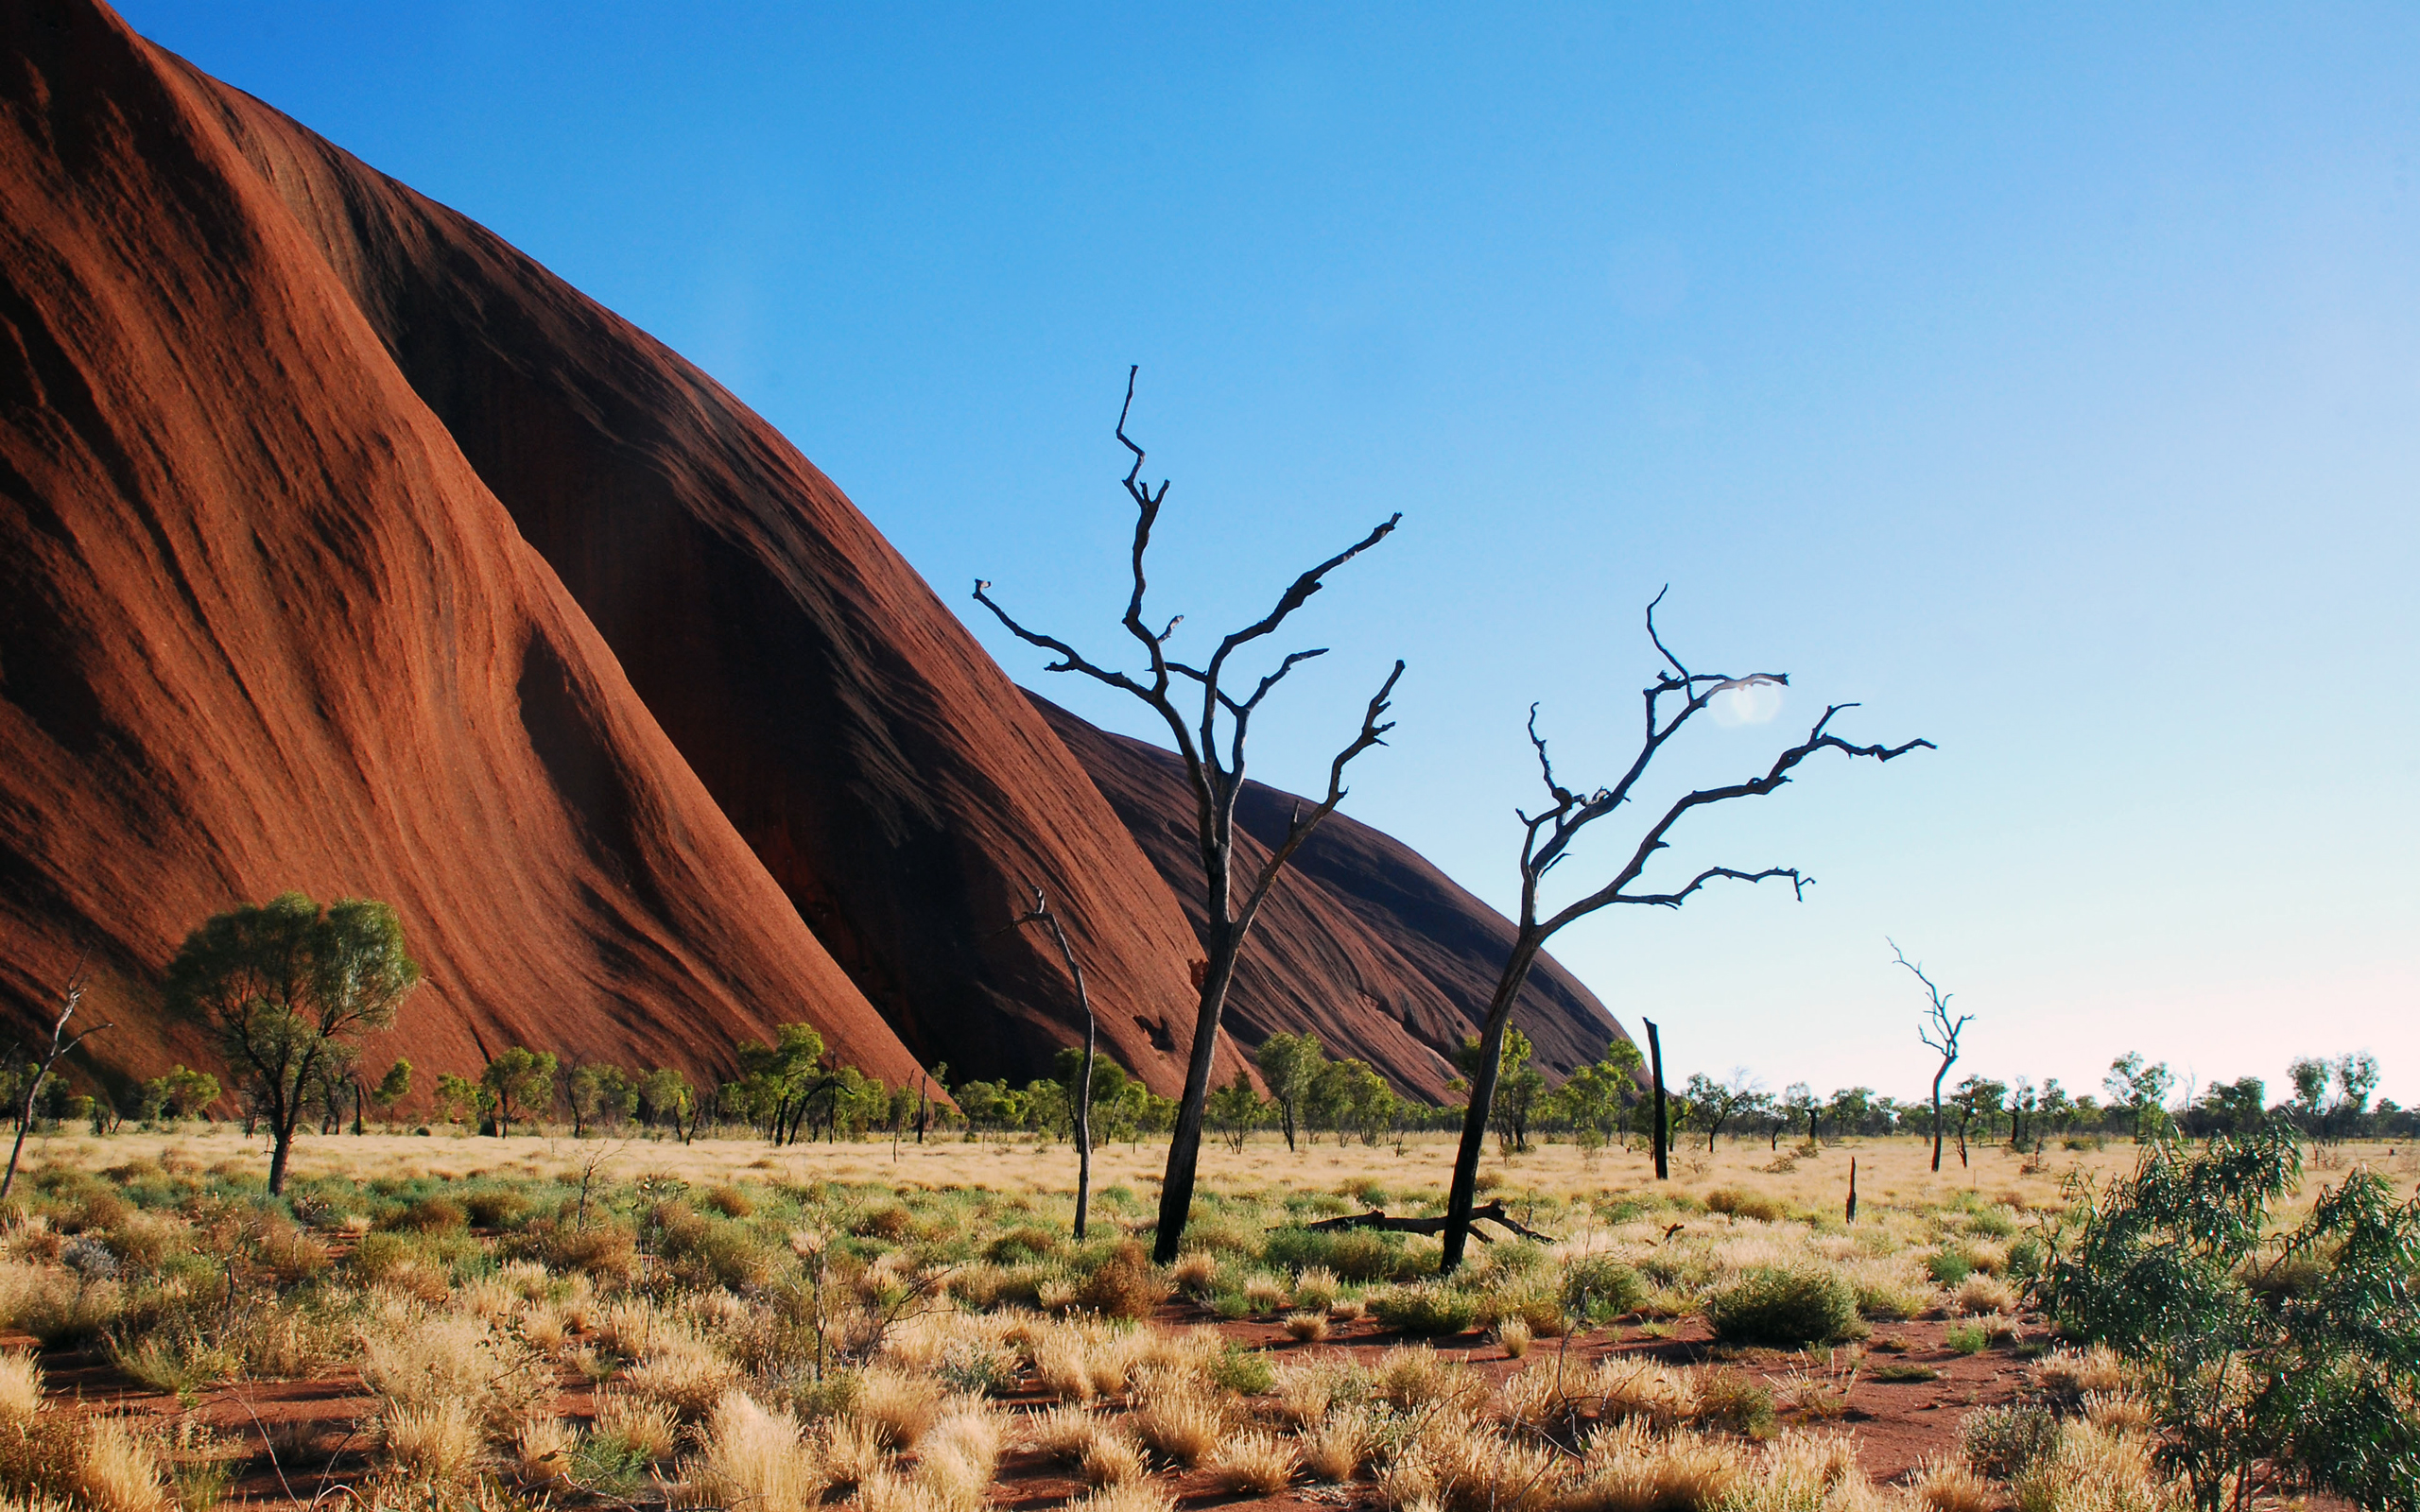 Uluru Ayers Rock, iconic Australian monument surrounded by blue sky, shrubs, and surreal scenery.